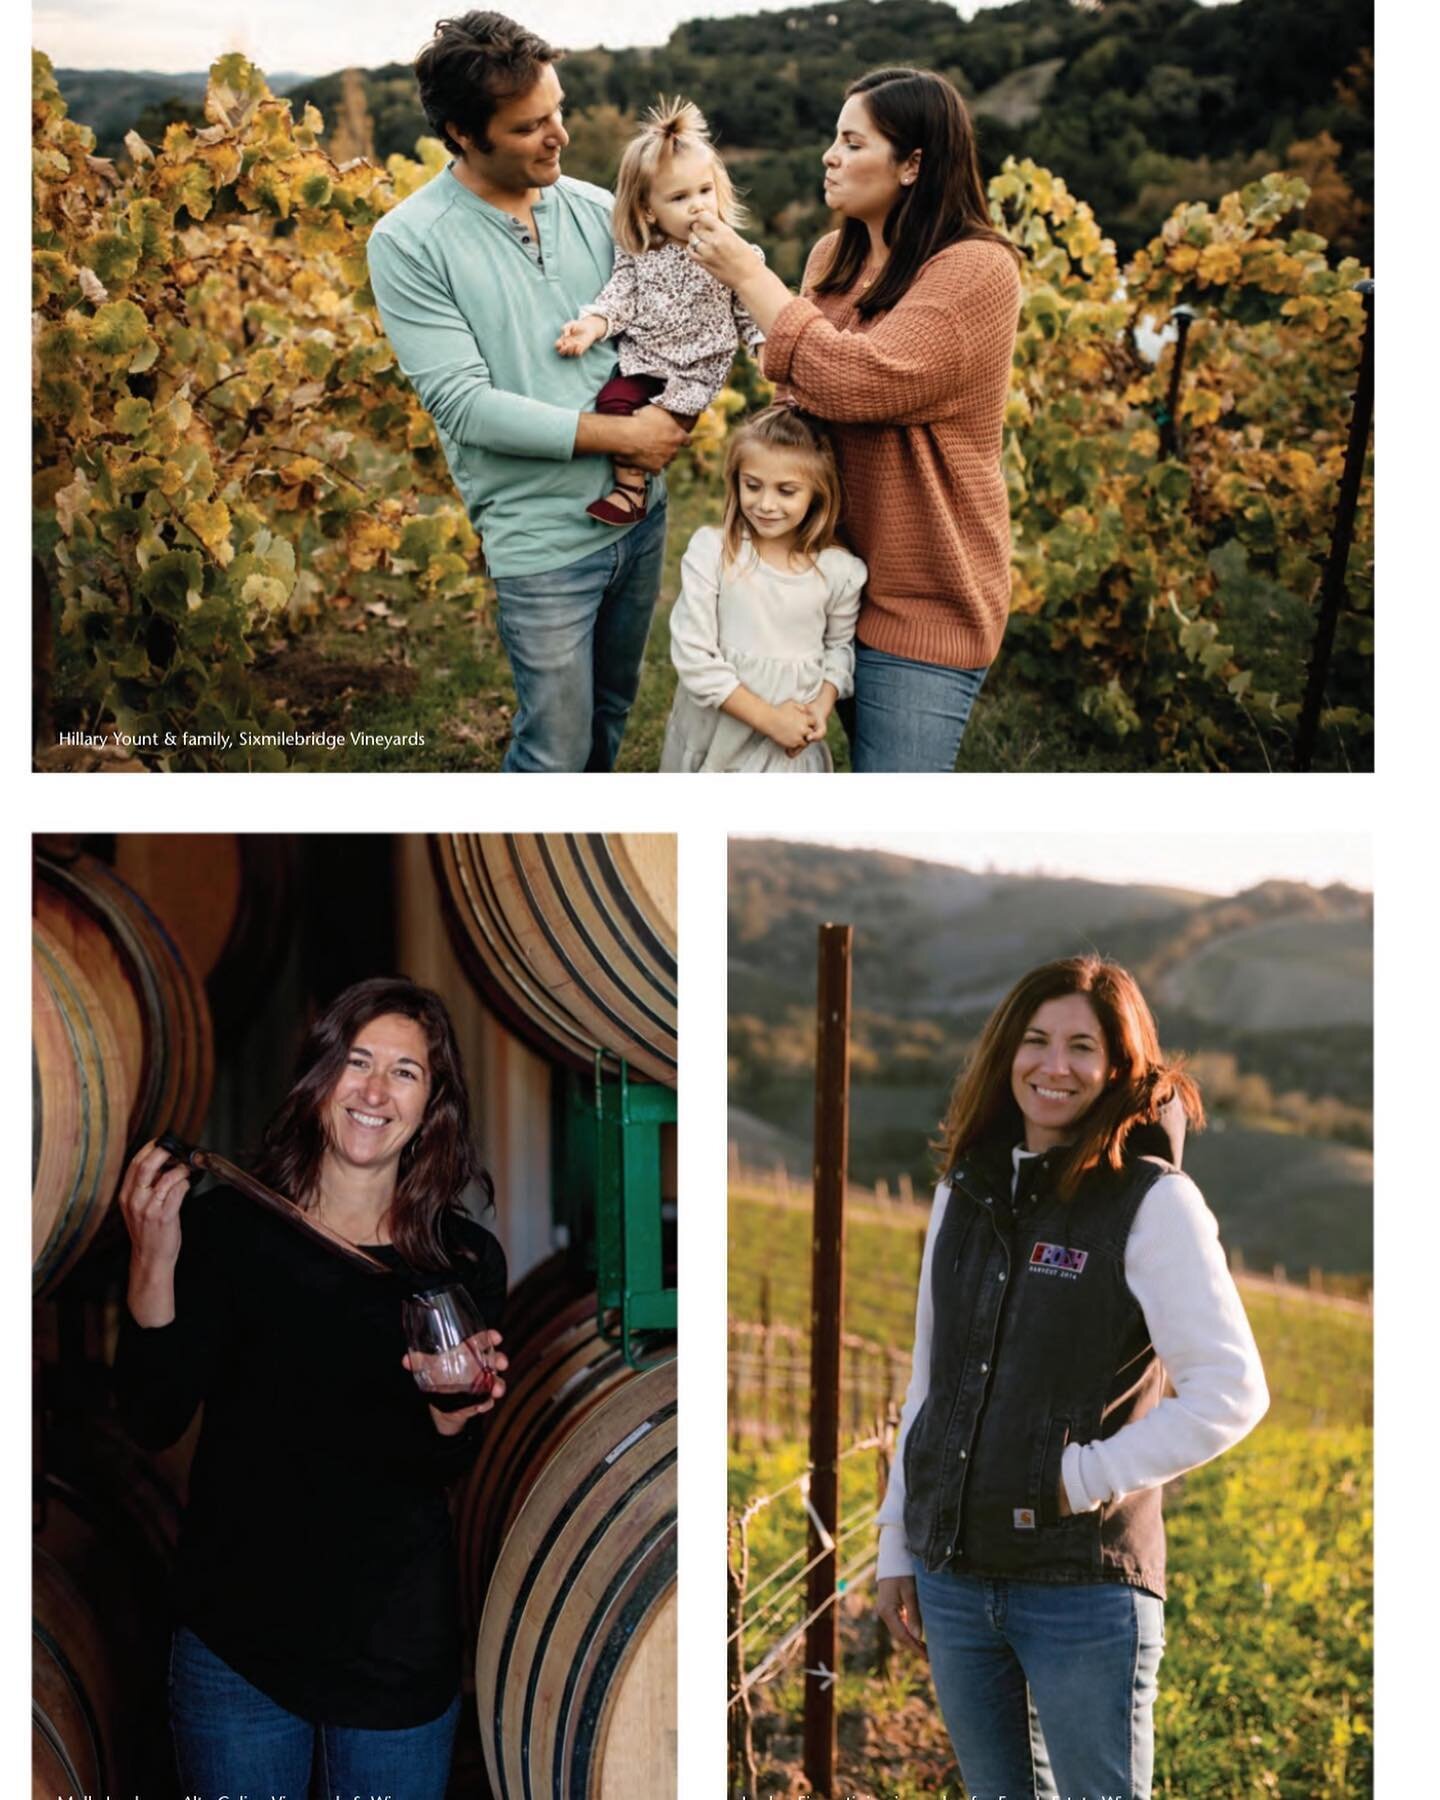 So excited that @hillaryyount is being recognized for her badass grape growing! I can&rsquo;t believe how lucky I am to get to make wine from her art! So fun to see some of our great friends achievements recognized as well @mendonesianmolly @jordanfi